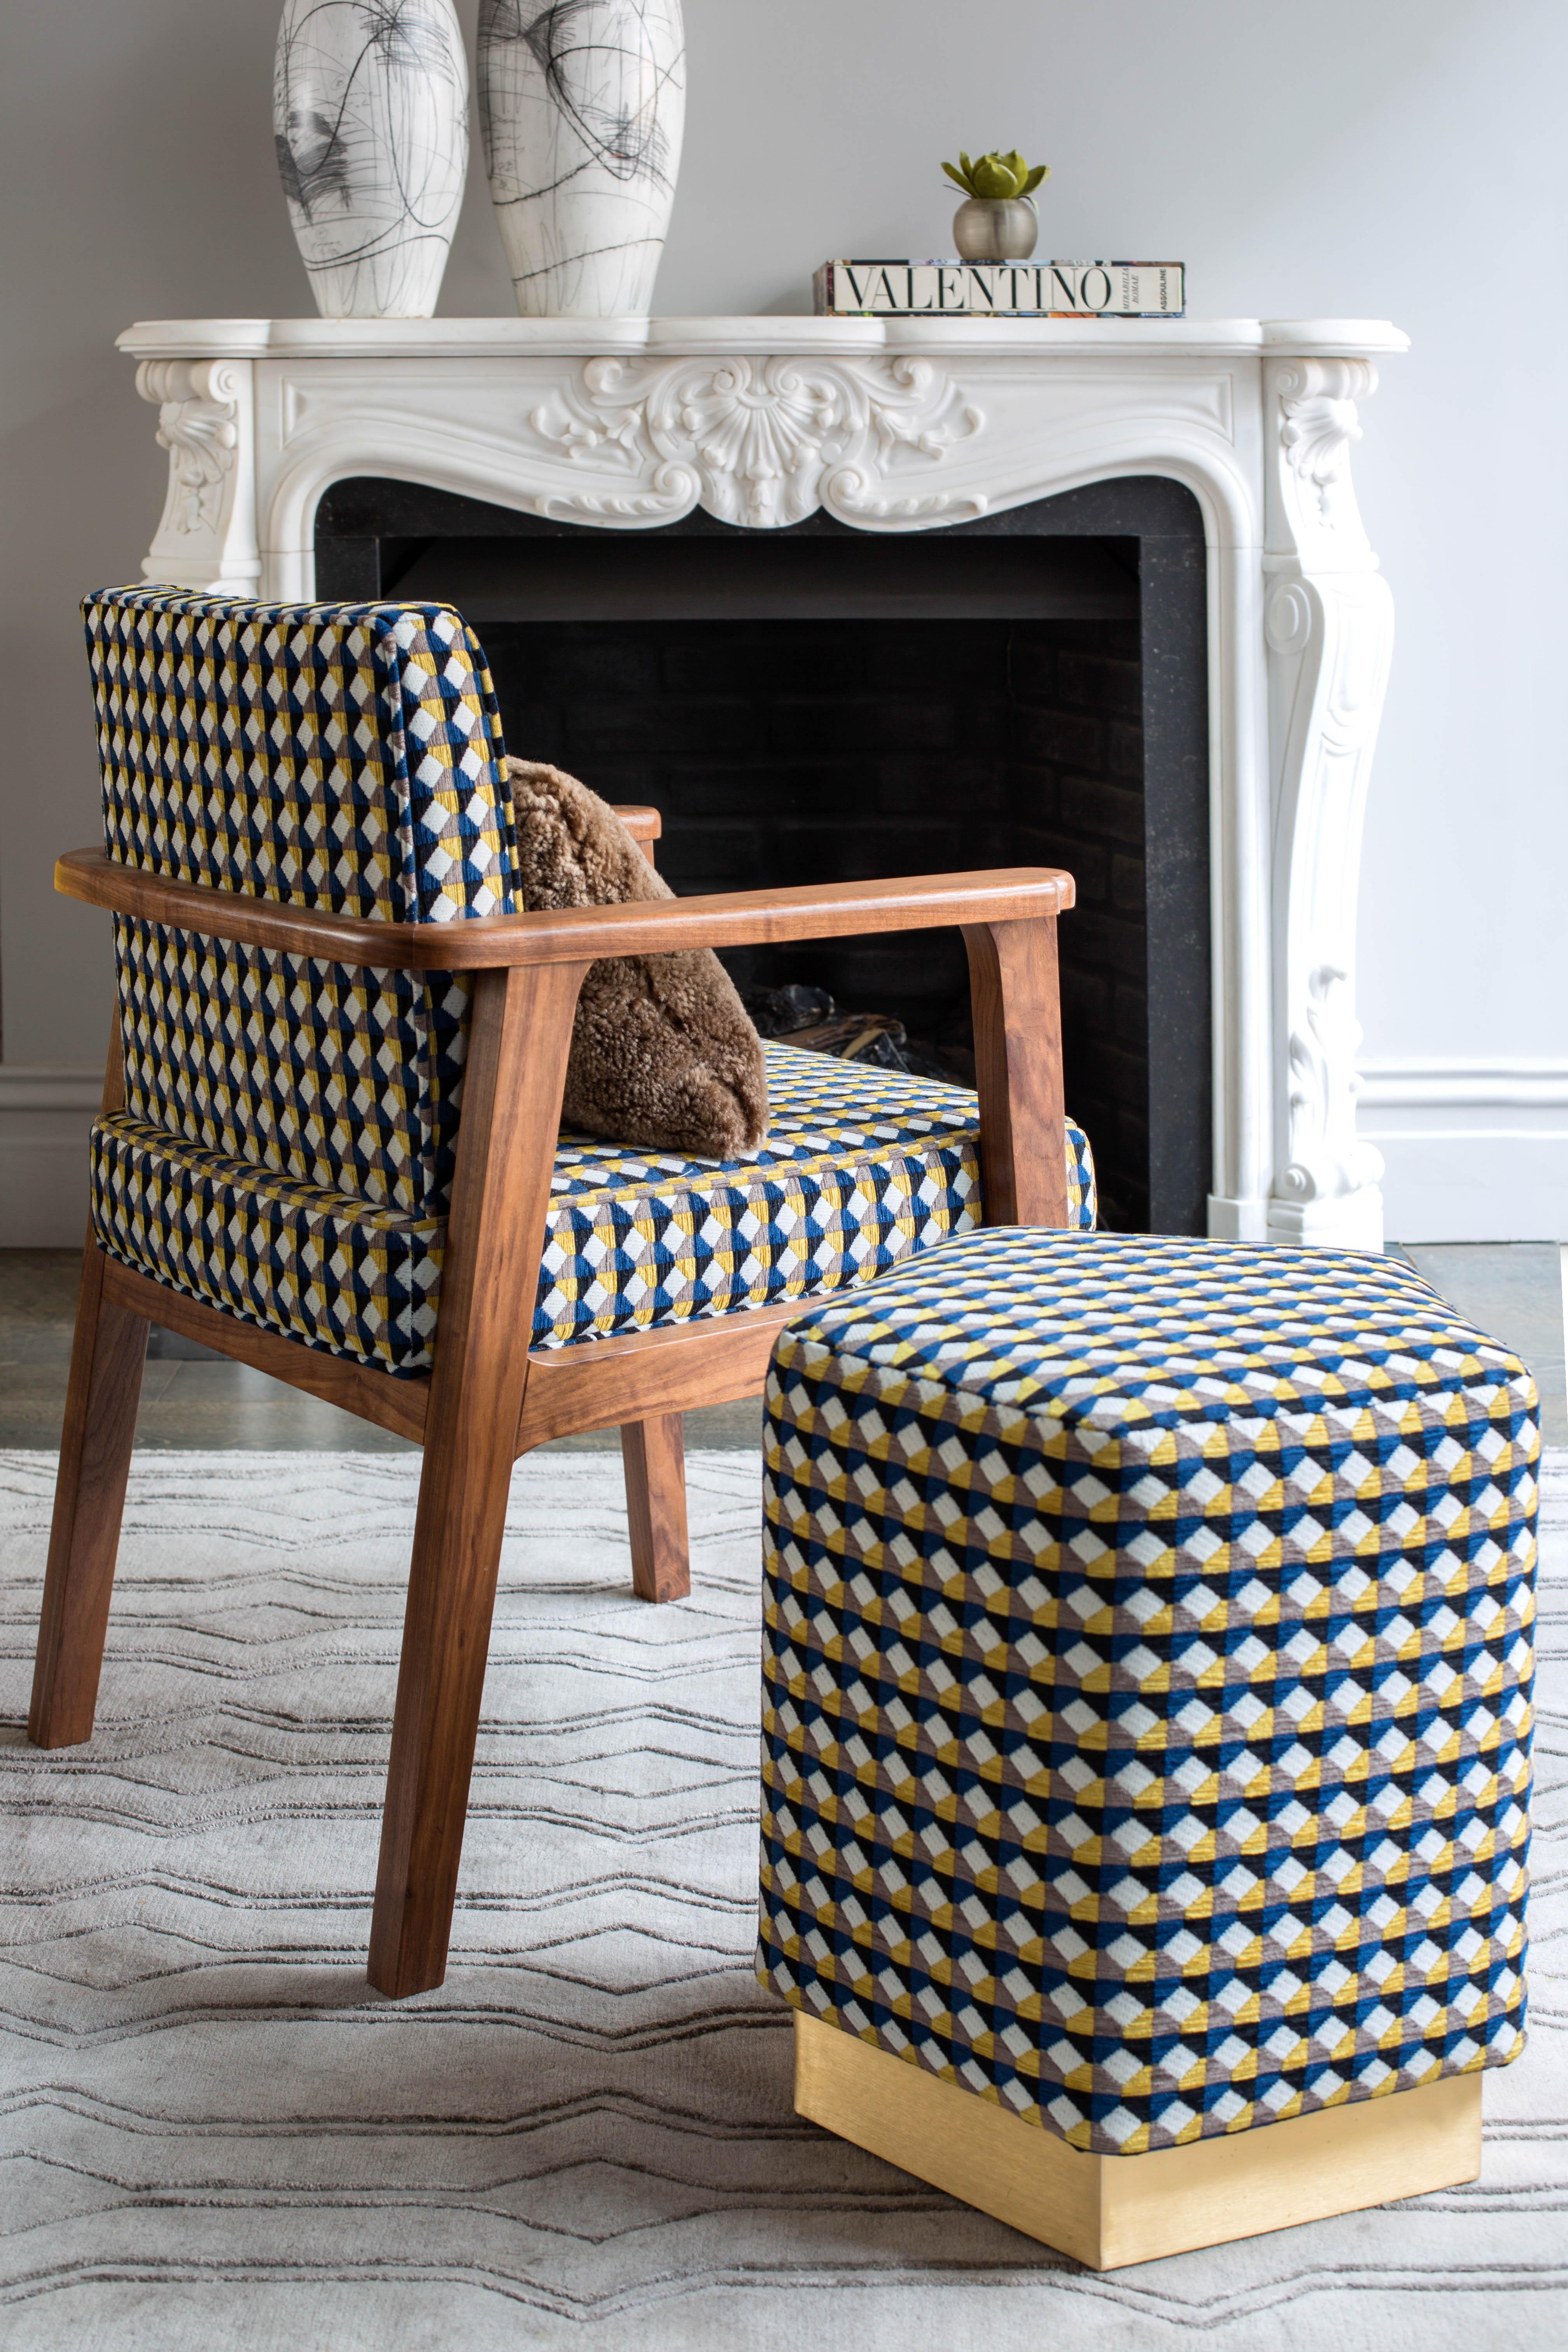 Introducing the Ermes Pouf from Casa Botelho - a funky and functional addition to any room! This pentagon-shaped pouf is a perfect balance of visual intrigue and versatility. Available in a range of colorful and textured fabrics, as well as metallic